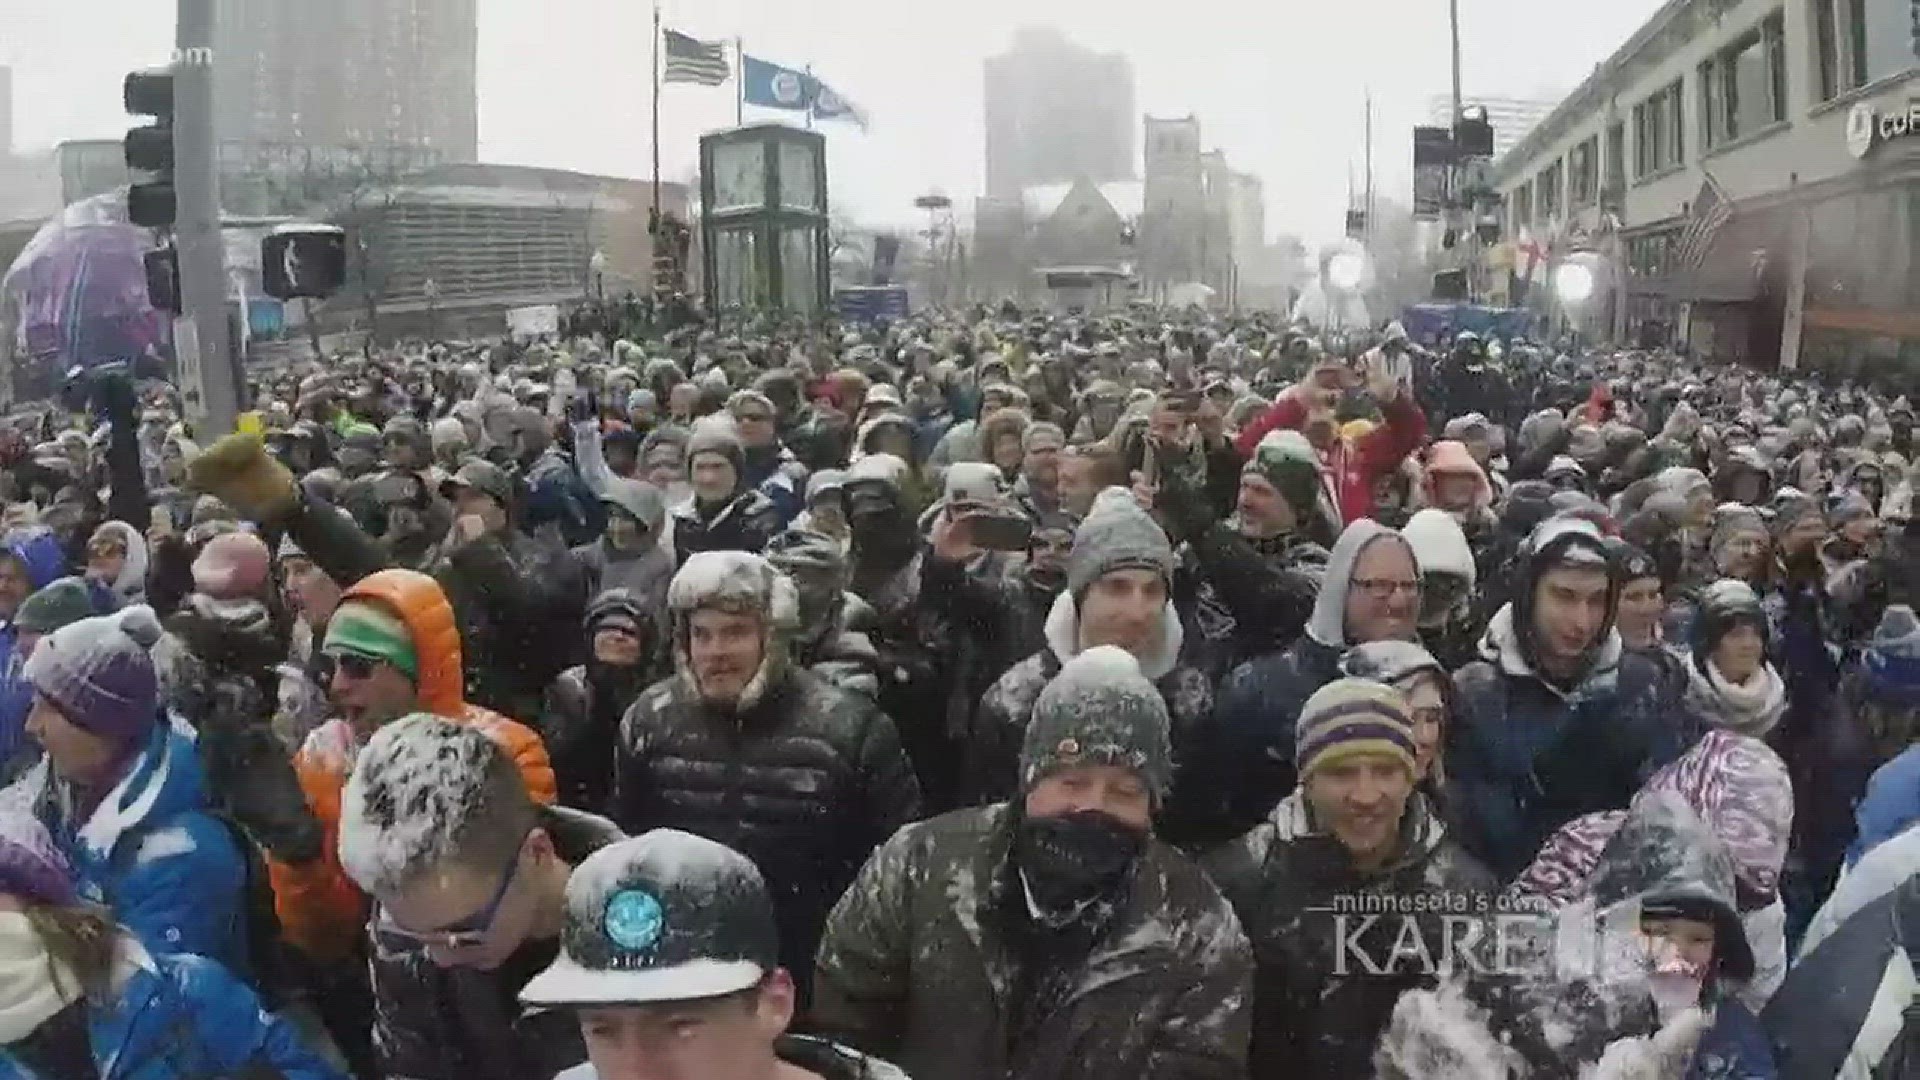 It was a bold move for Minnesota to host the Super Bowl, given our harsh winters. But instead of shying away from that, organizers "embraced" it - with the "Bold North" theme. And as KARE 11's Boyd Huppert found, it was a smart move.